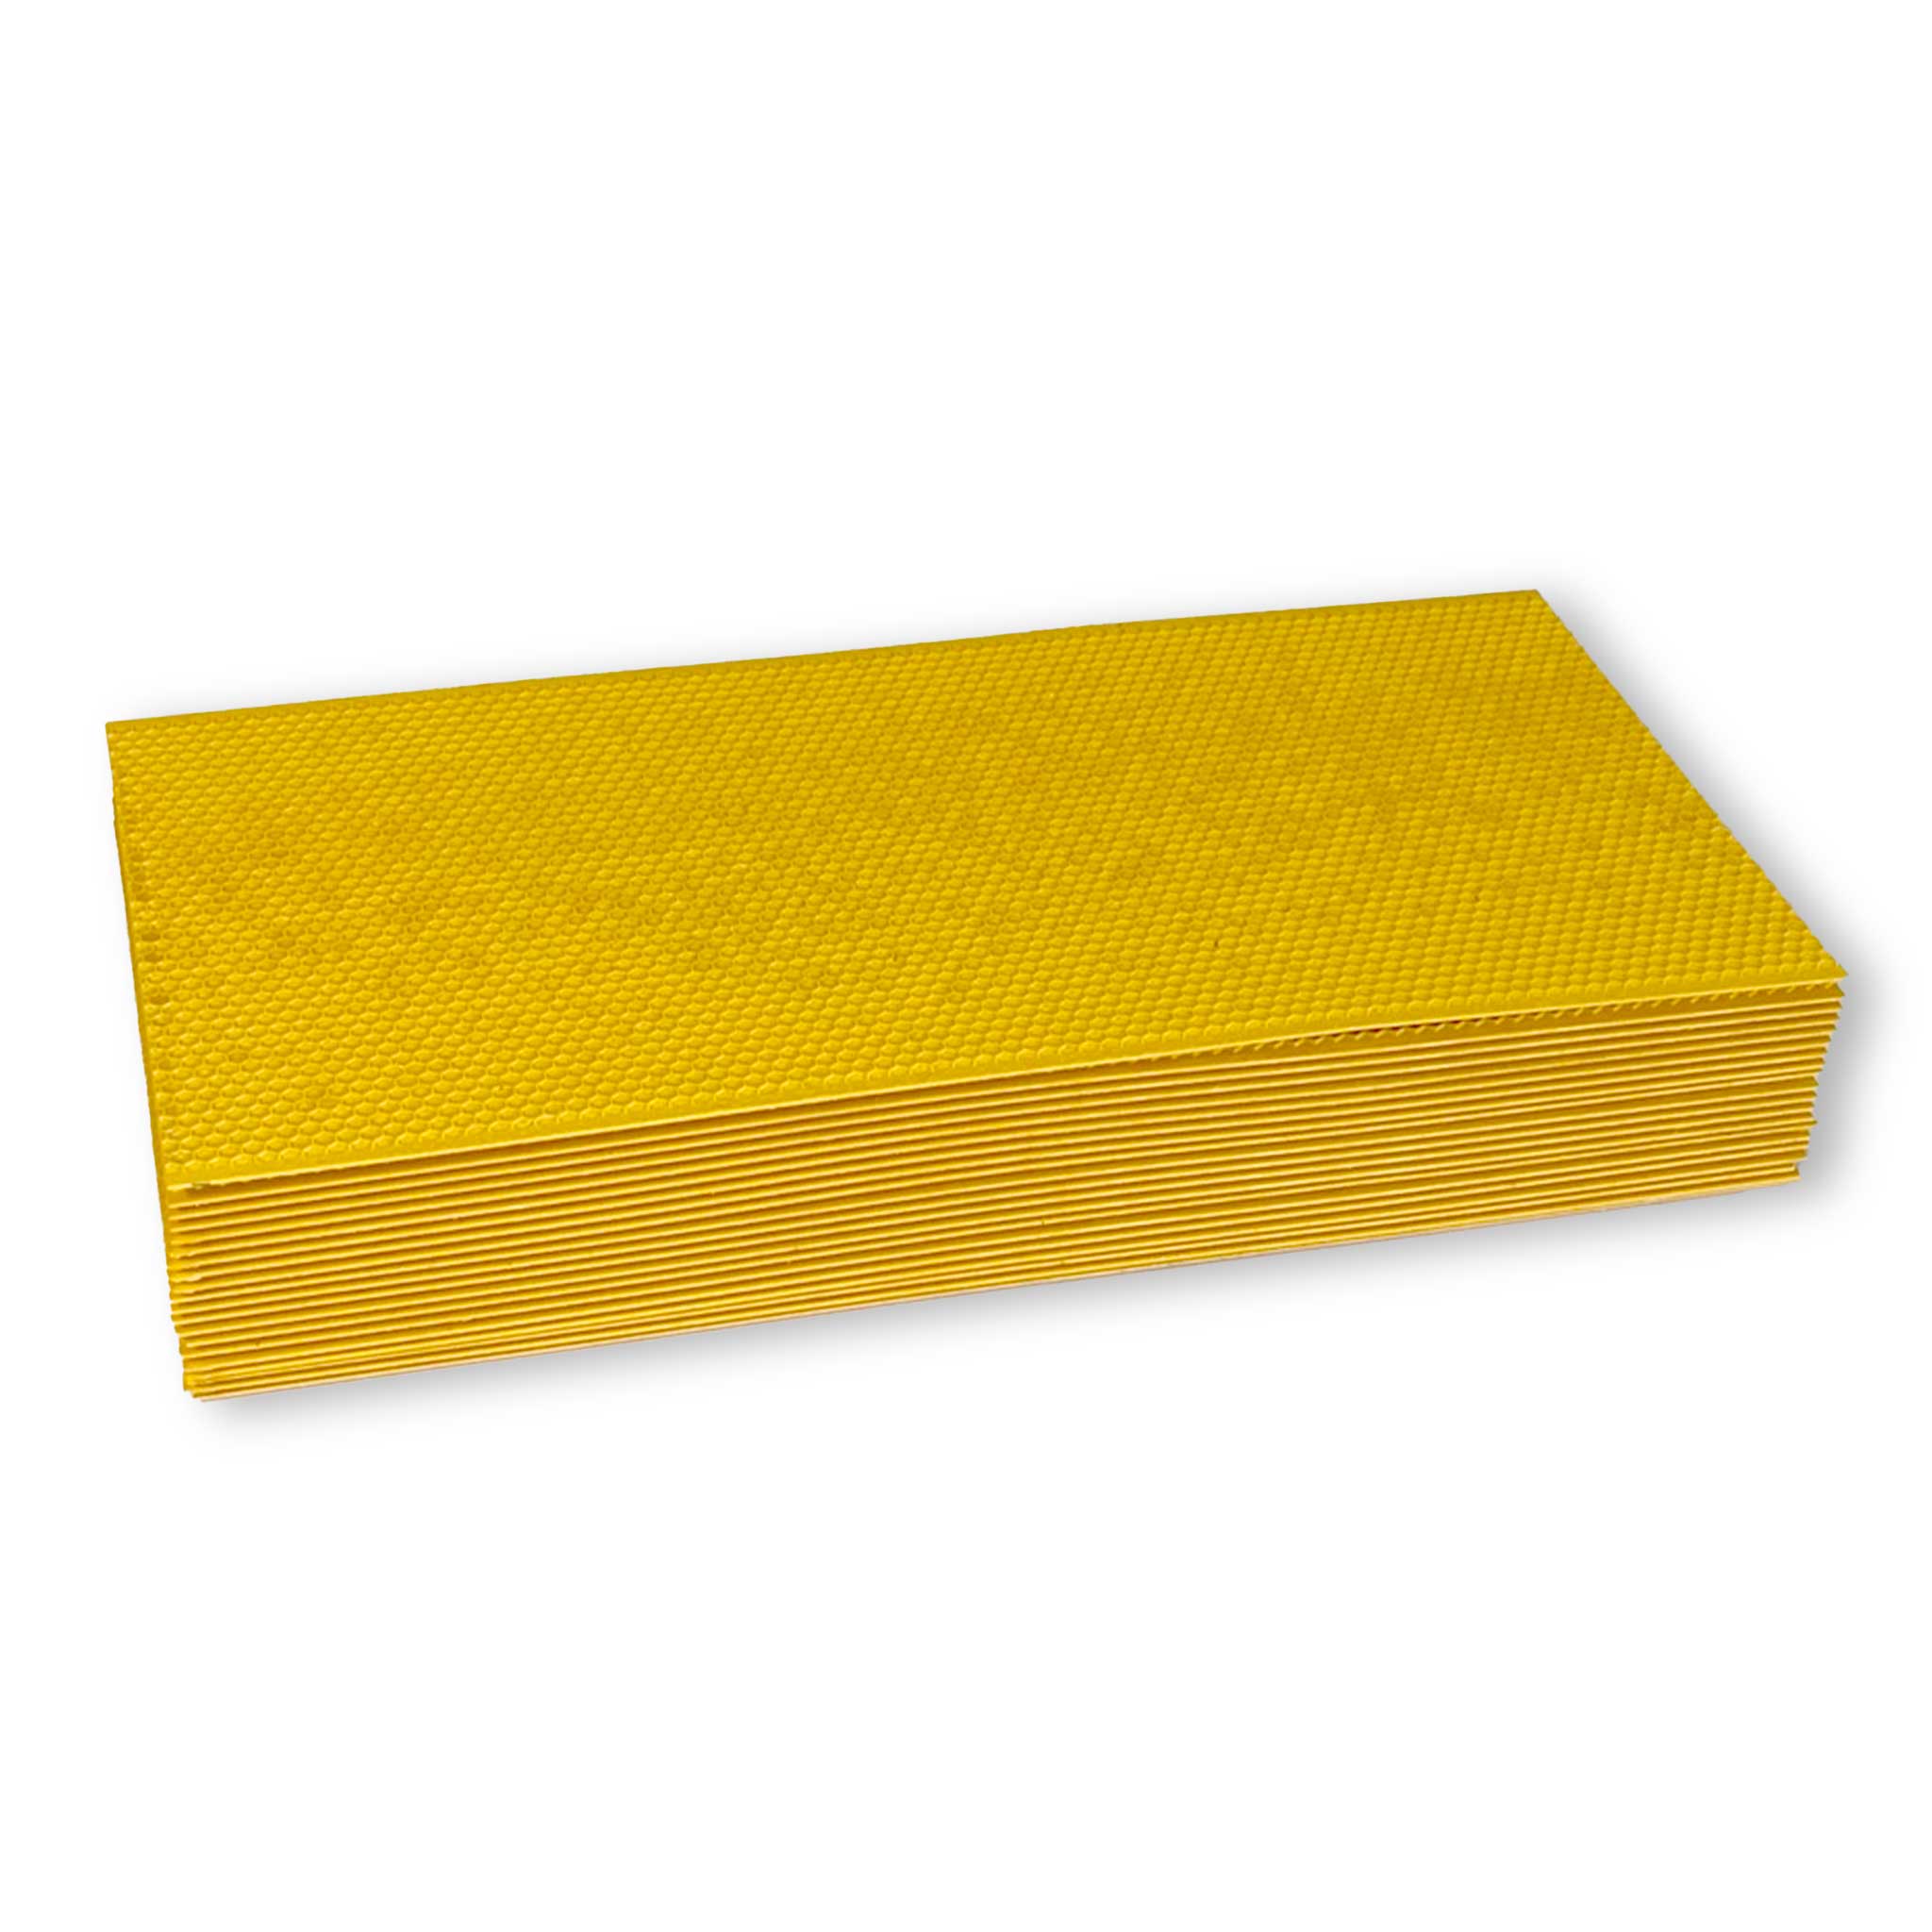 Triple Wax Coated Yellow Full Depth Plastic Foundation - Hive Parts collection by Buzzbee Beekeeping Supplies